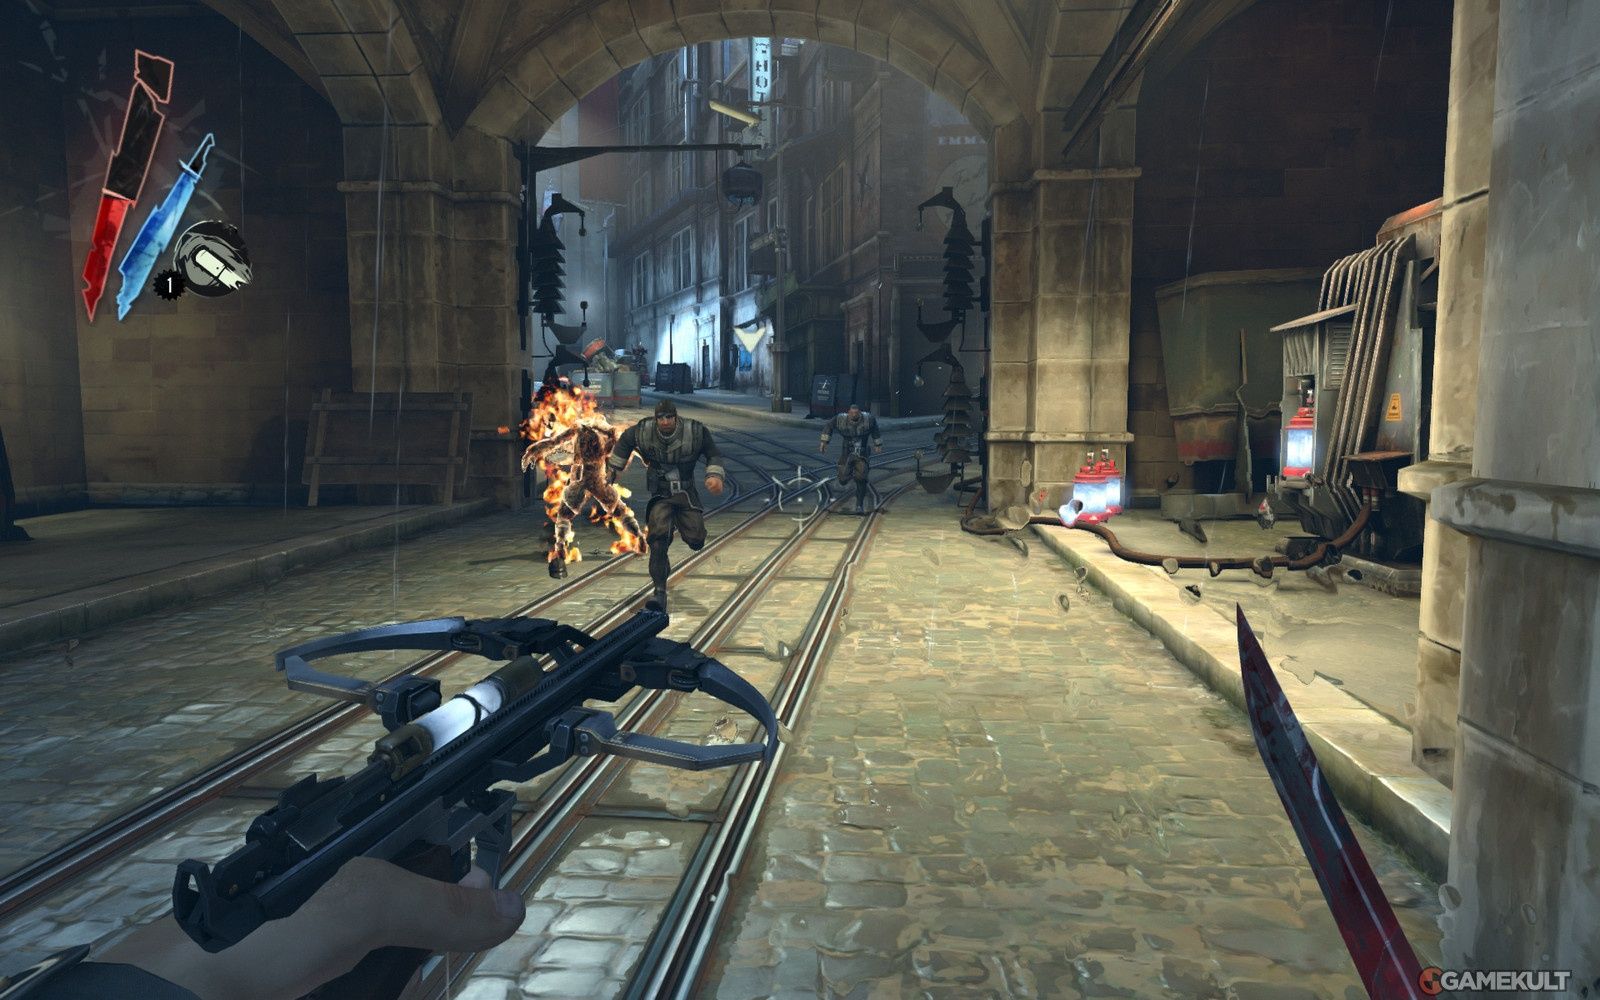 Gra na PS3 Dishonored PL